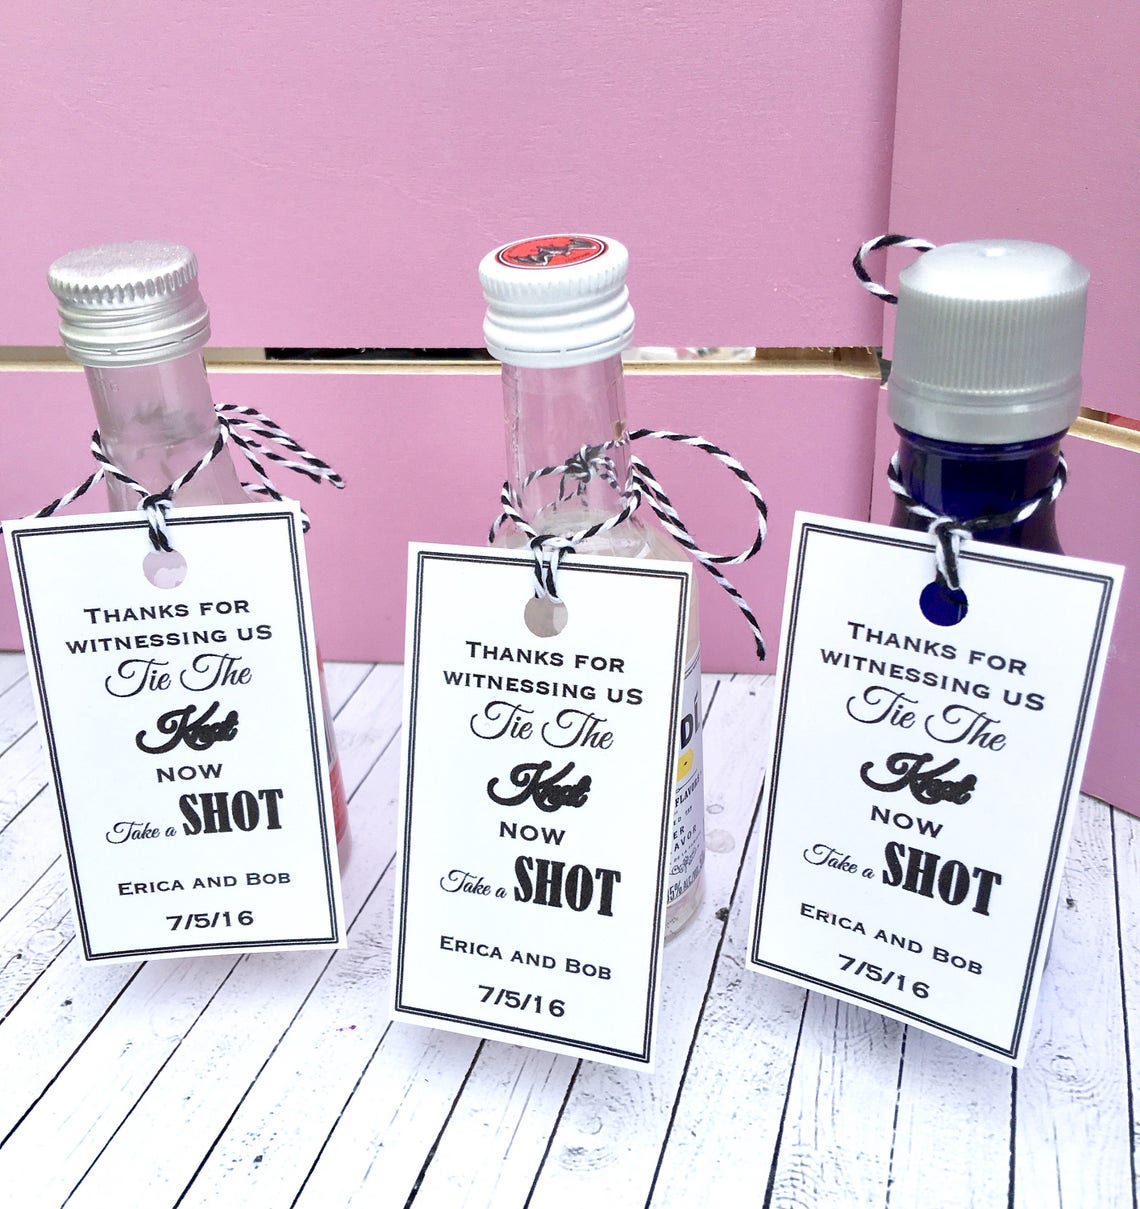 Mini Alcohol Favor Tags We Tied the Knot Take a Shot - Etsy